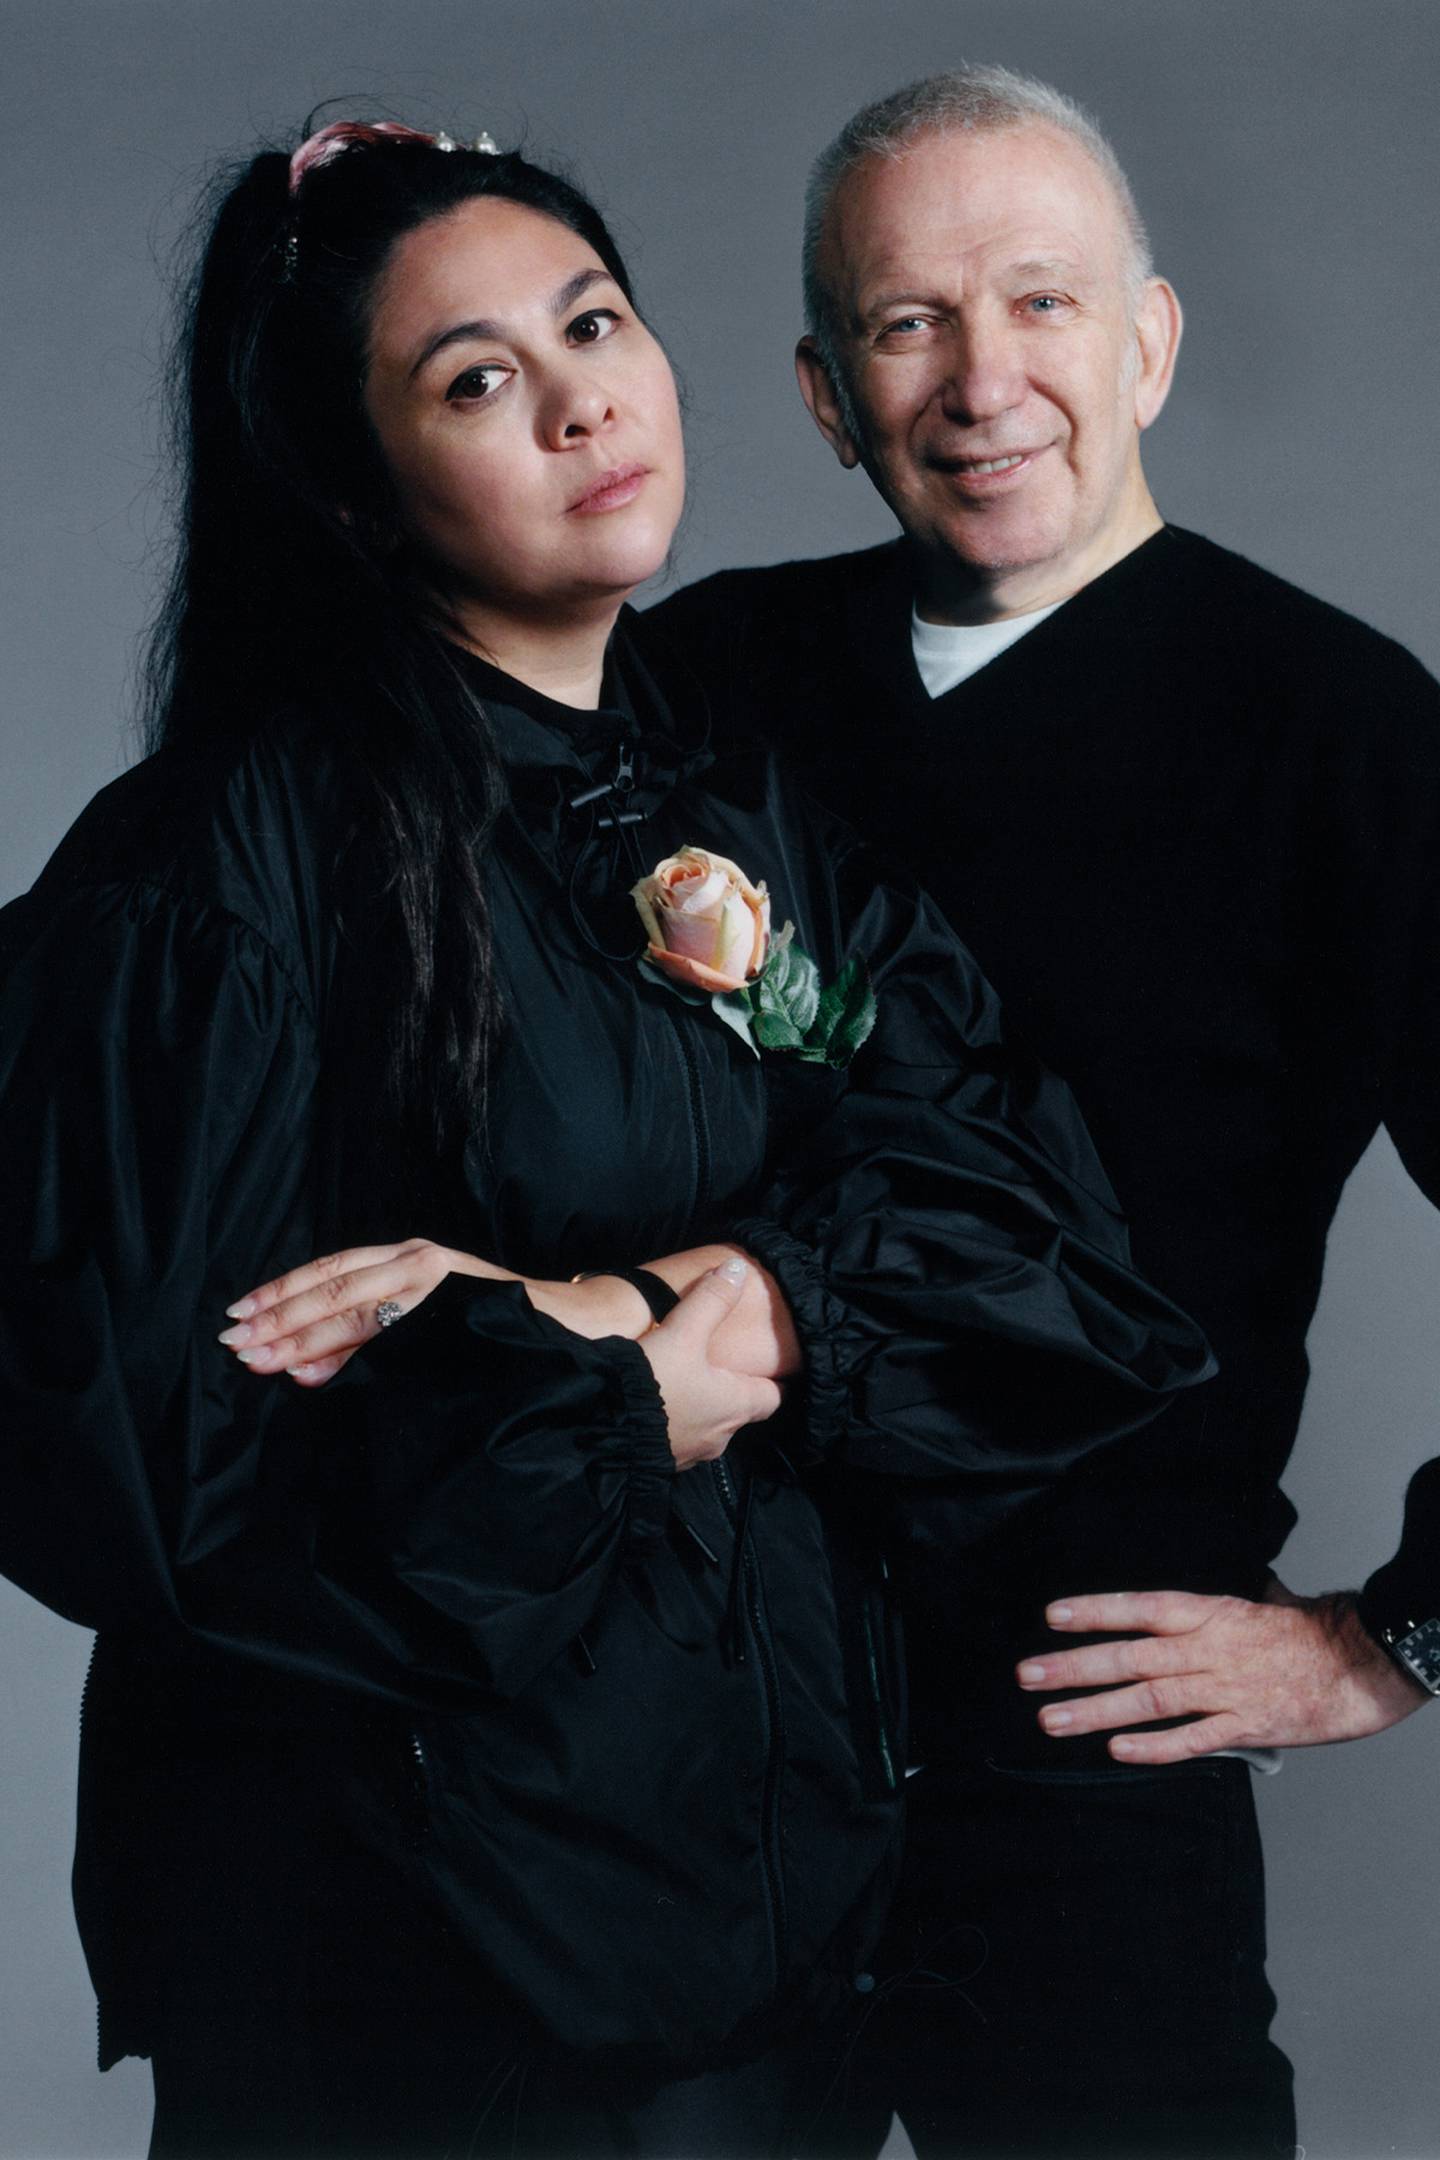 Simone Rocha is the latest guest couturier at Jean Paul Gaultier.